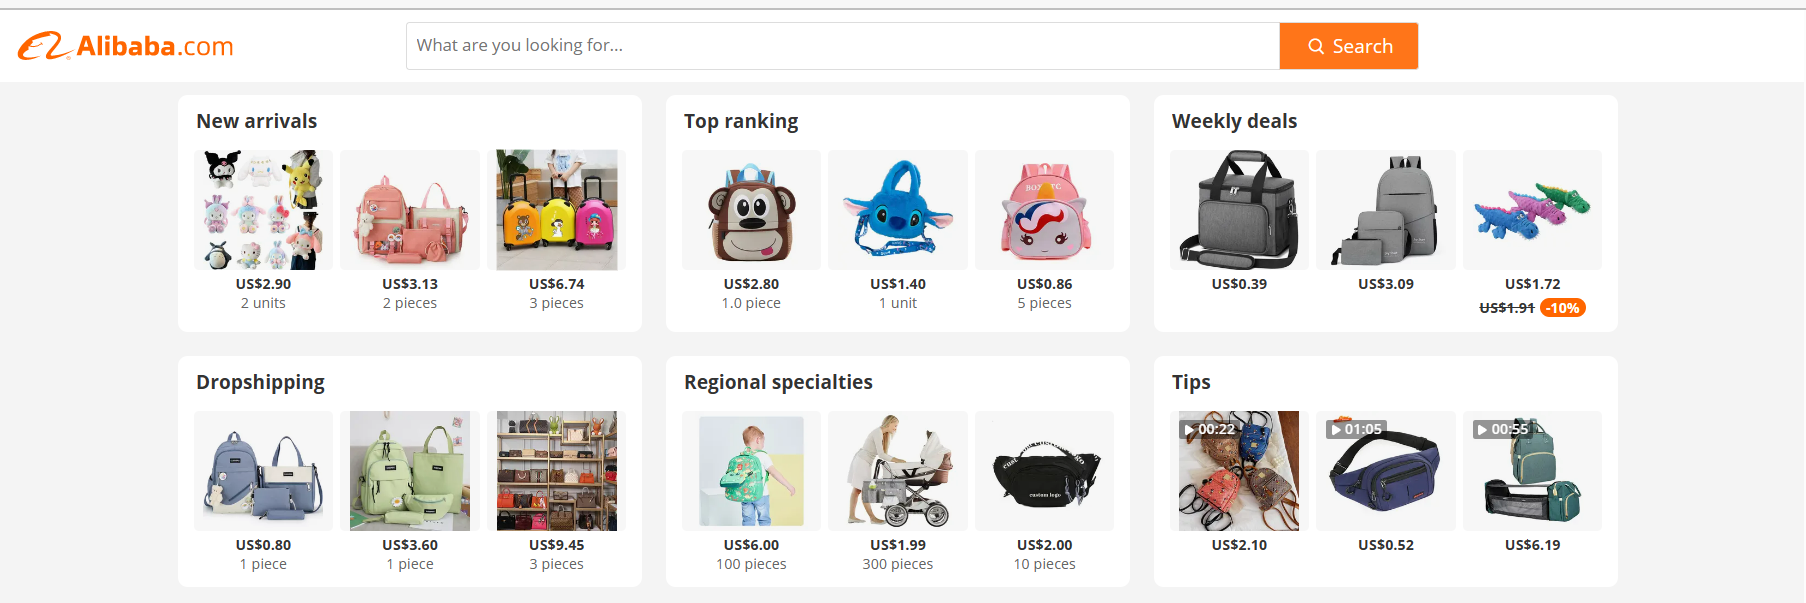 Alibaba- Sourcing Products